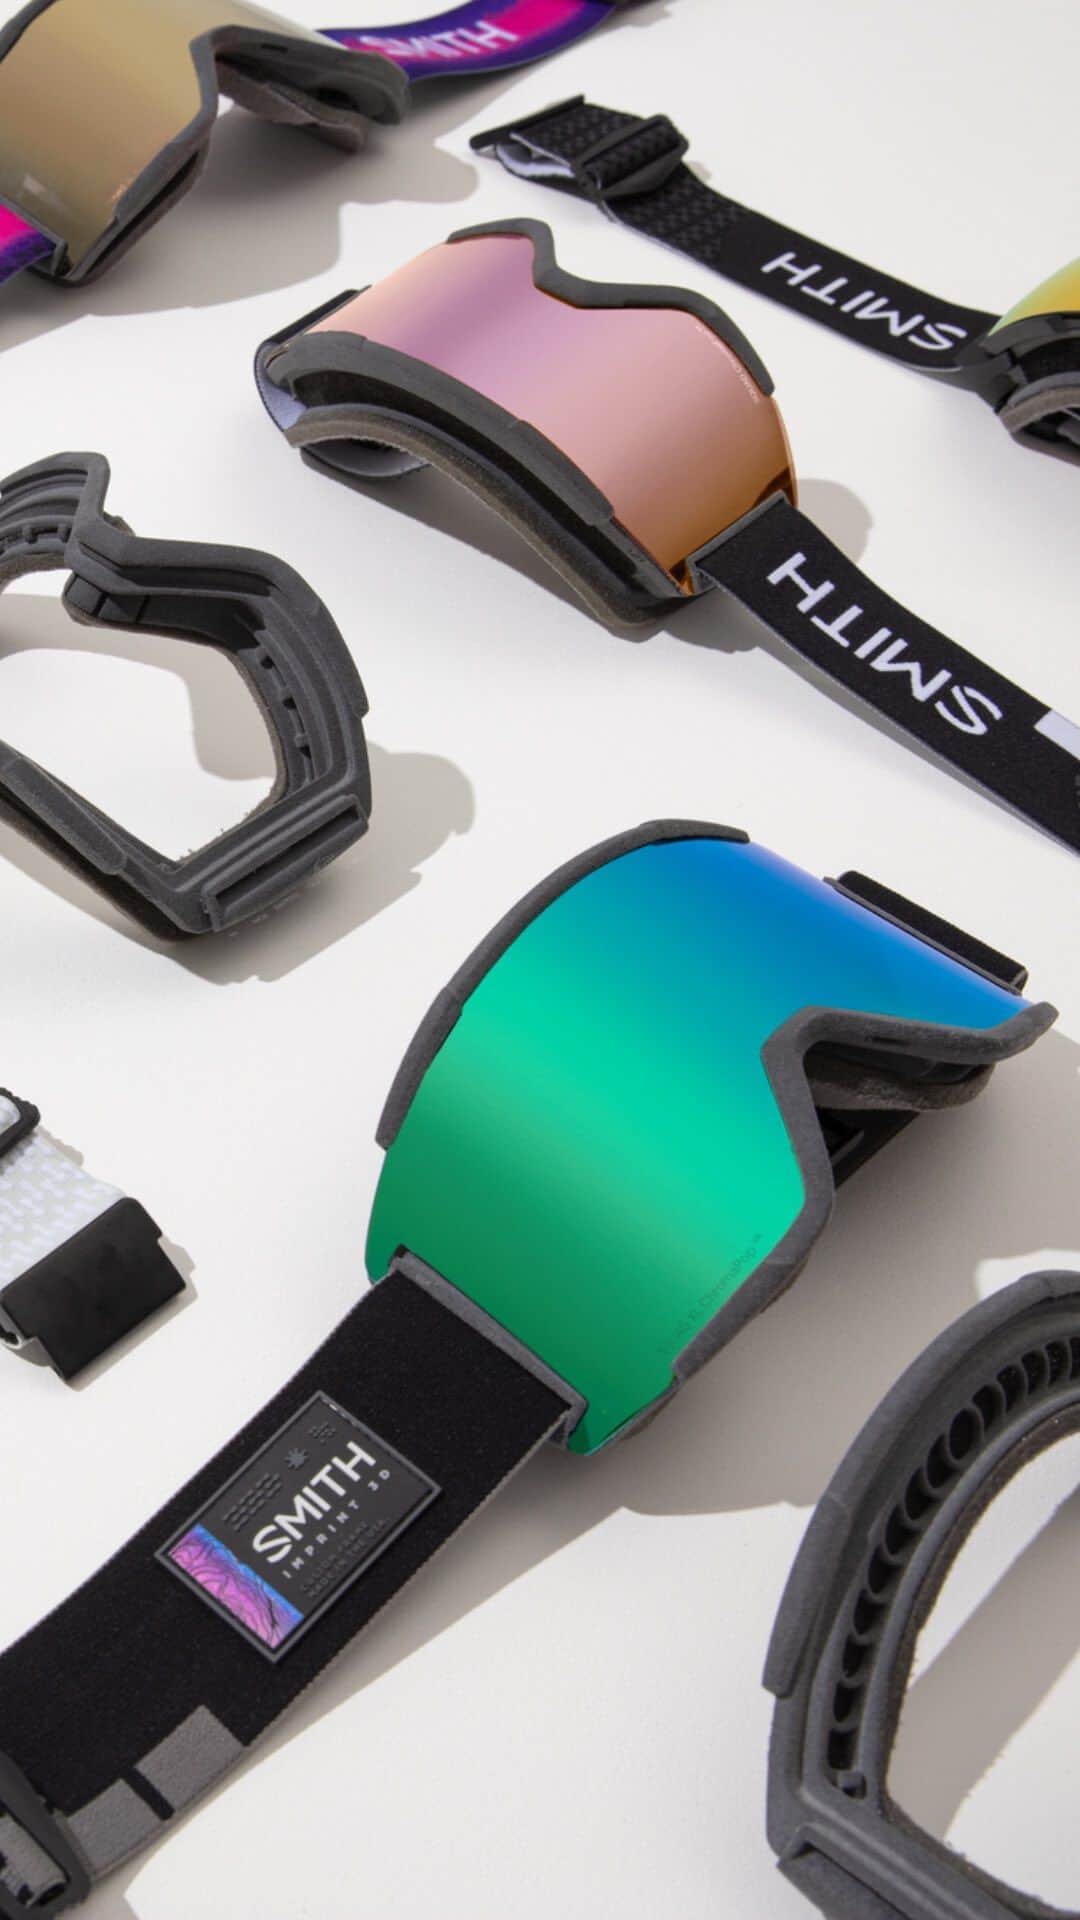 Smithのインスタグラム：「Fit to face anything.   Introducing Squad and Squad XL to the Smith Imprint 3D Collection. Based on a precision scan that maps the unique terrain of your face, we use cutting-edge 3D printing technology to create goggles with an ultra-custom fit. Made-to-order. One-of-a-kind. For you and you only. This is Custom redefined. Head to the link in our bio to learn more about the revolutionary Imprint 3D collection.」